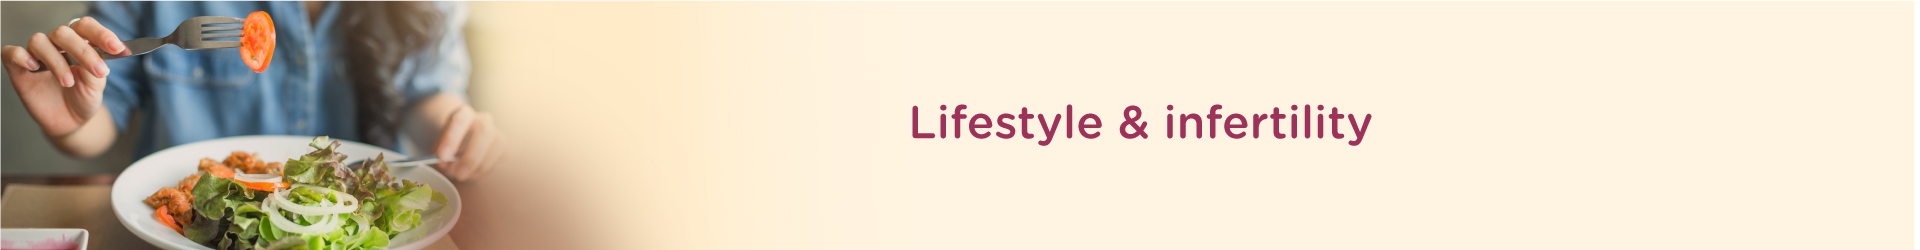 Lifestyle Factors And Reproductive Health